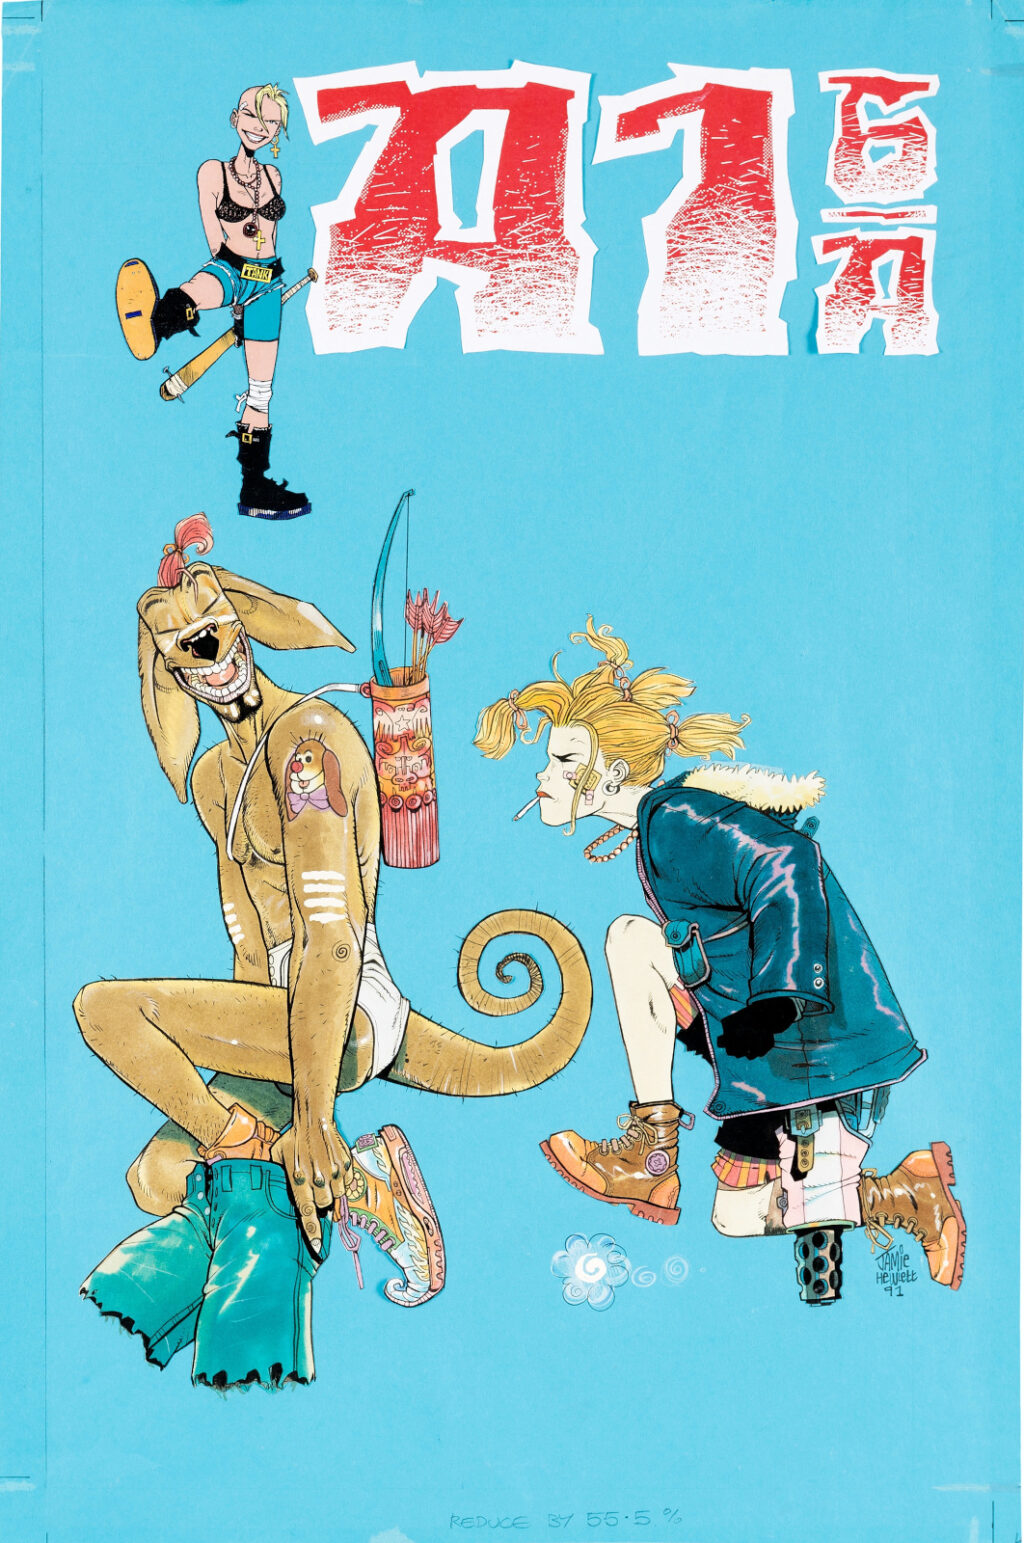 A1 issue 6 cover by Jamie Hewlett